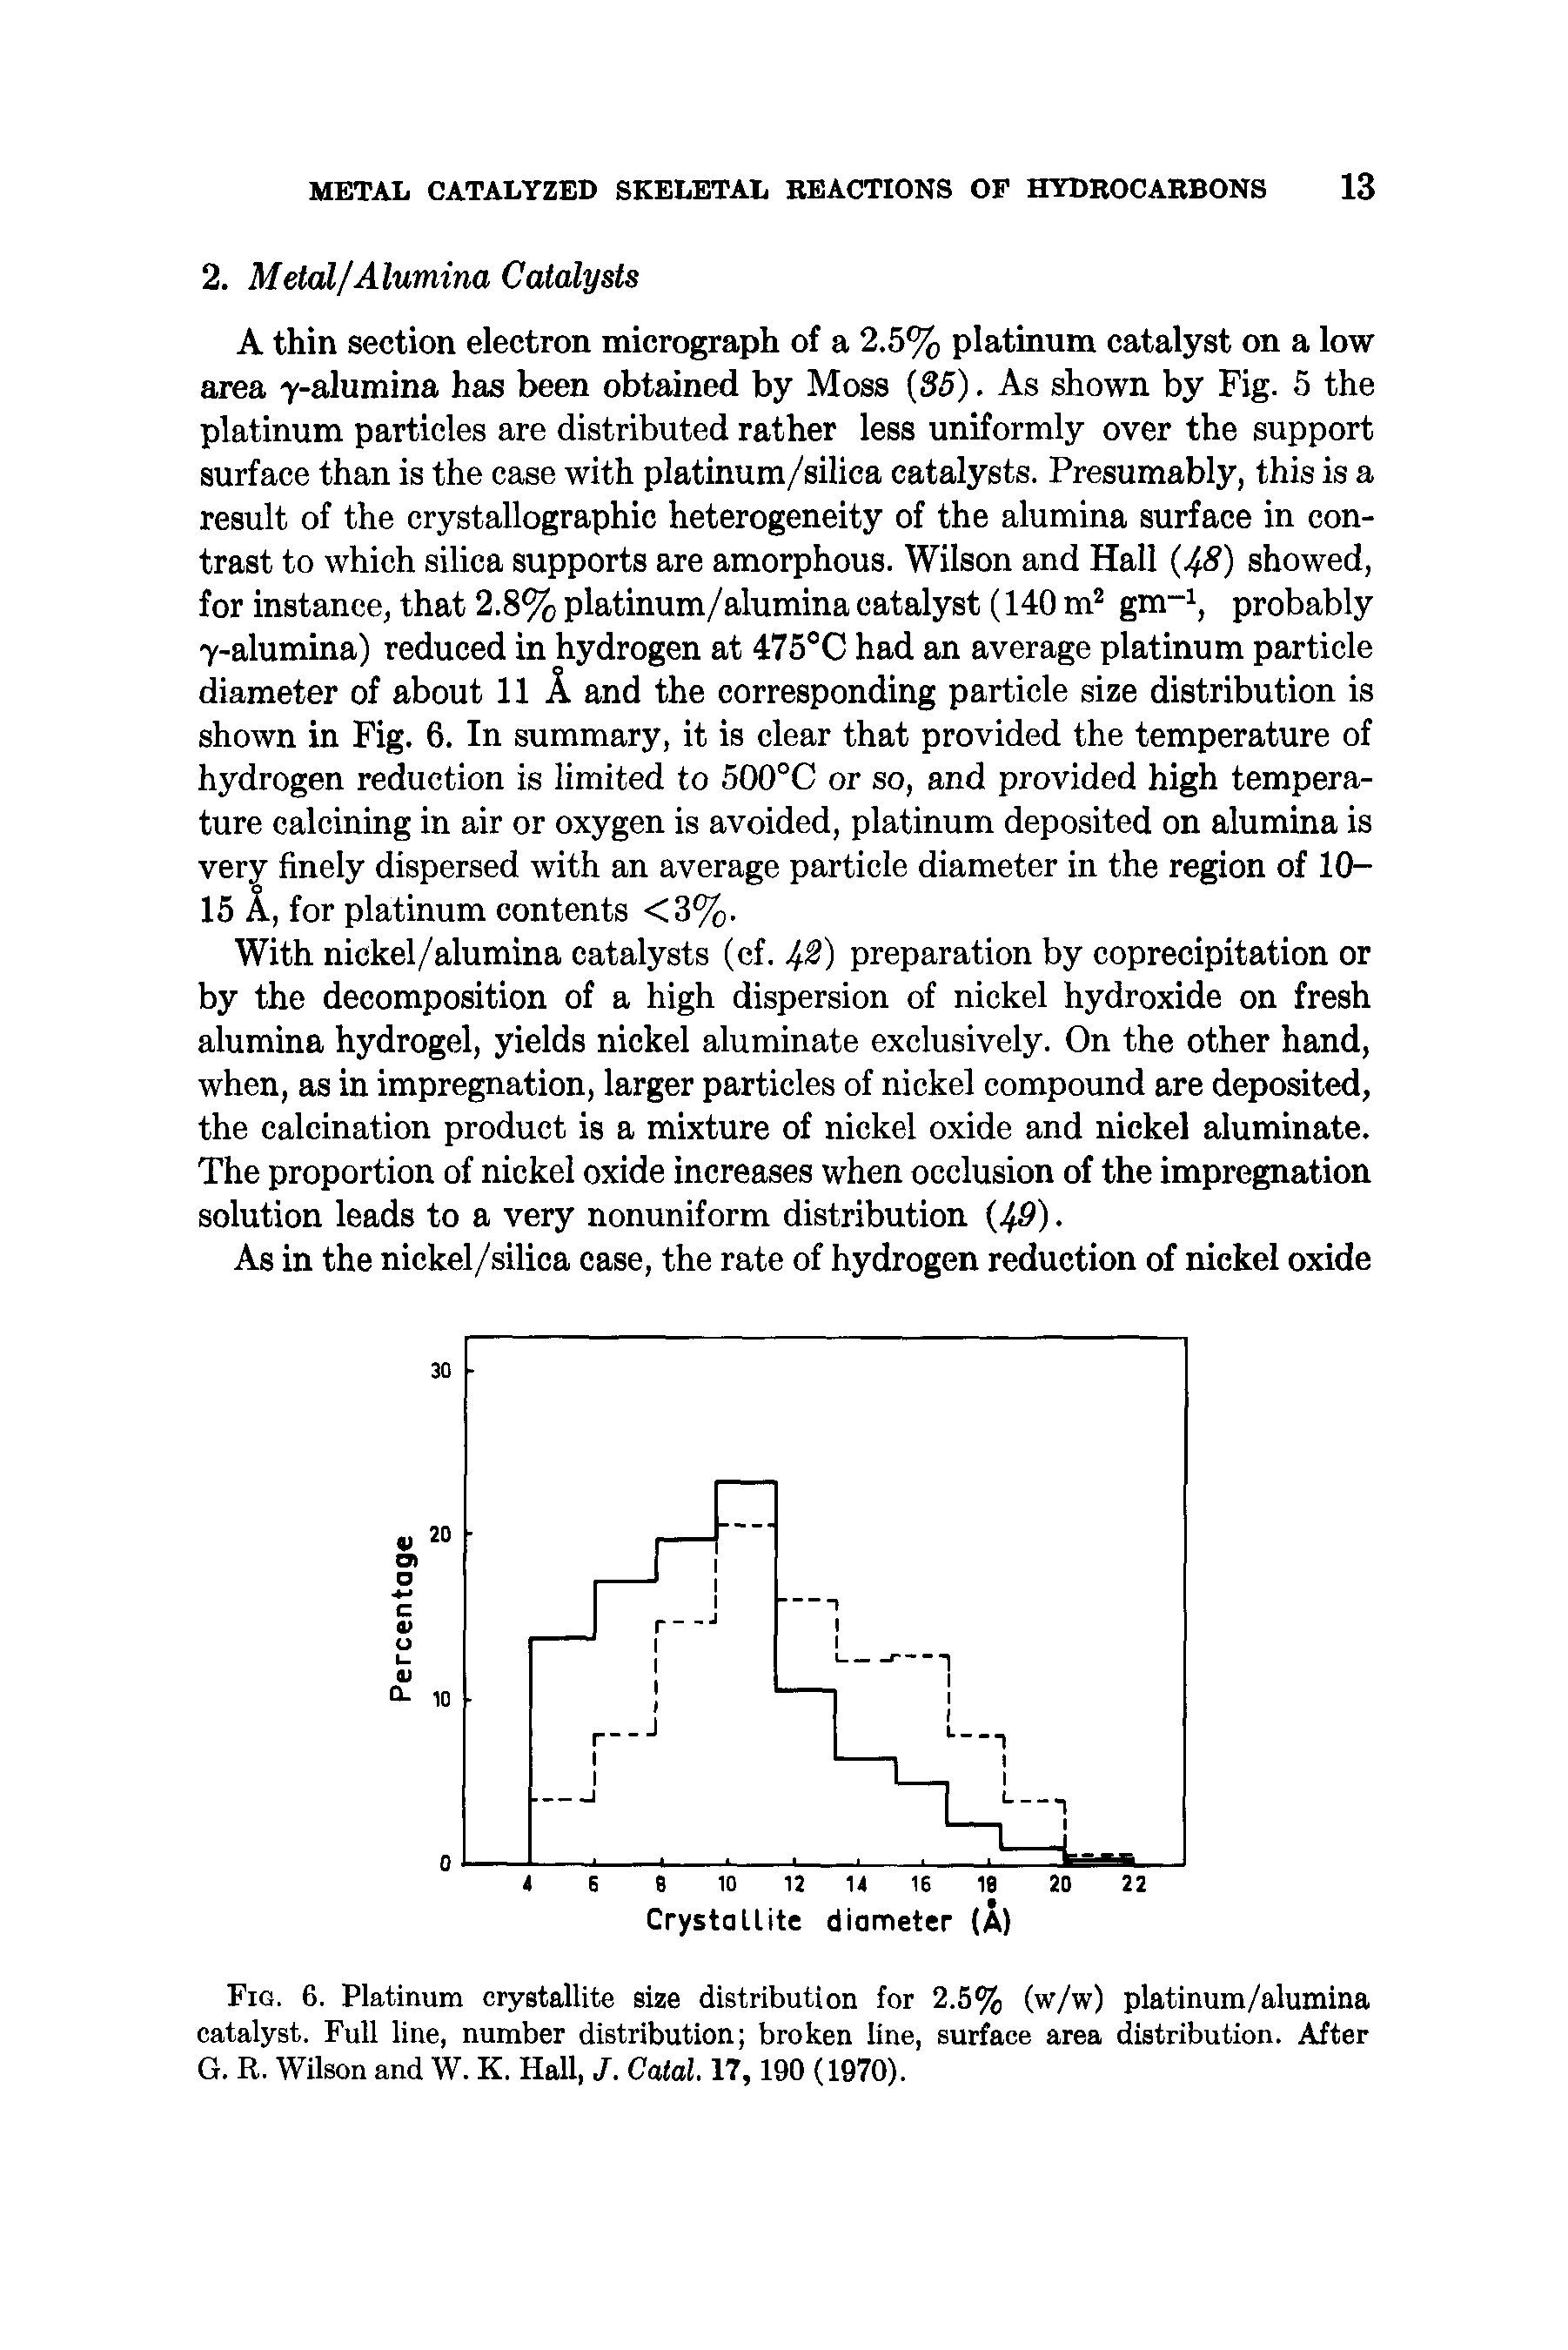 Fig. 6. Platinum crystallite size distribution for 2.5% (w/w) platinum/alumina catalyst. Full line, number distribution broken line, surface area distribution. After G. R. Wilson and W. K. Hall, J. Catal. 17, 190 (1970).